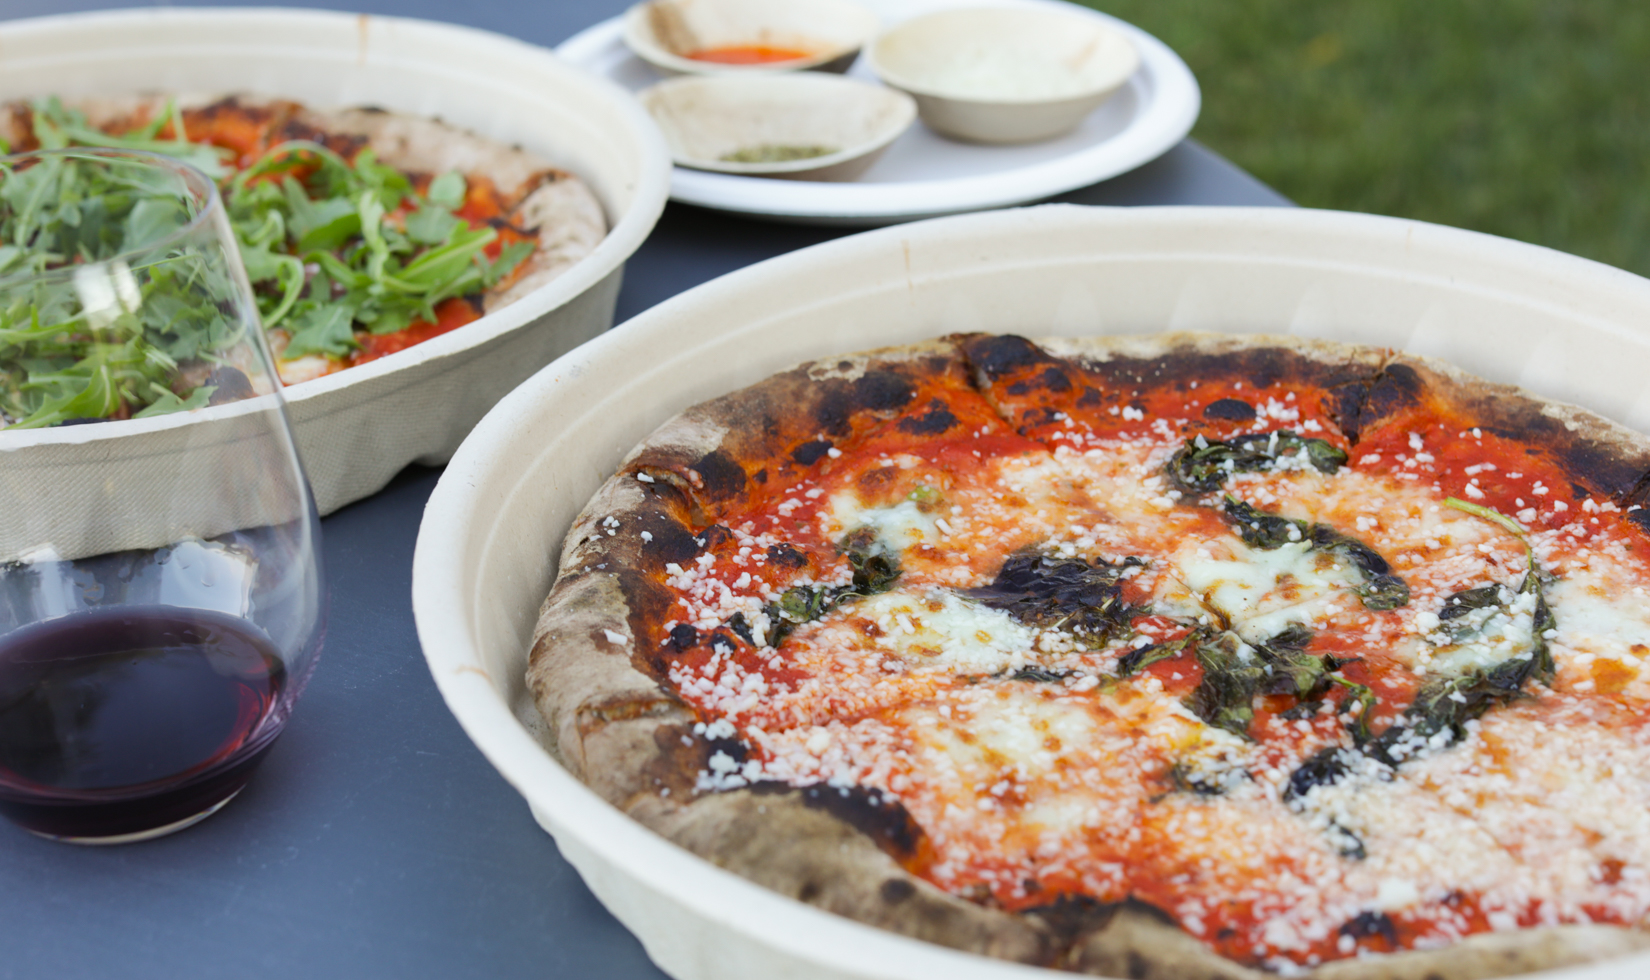 outdoor woodfired pizza and wine tasting in sonoma county